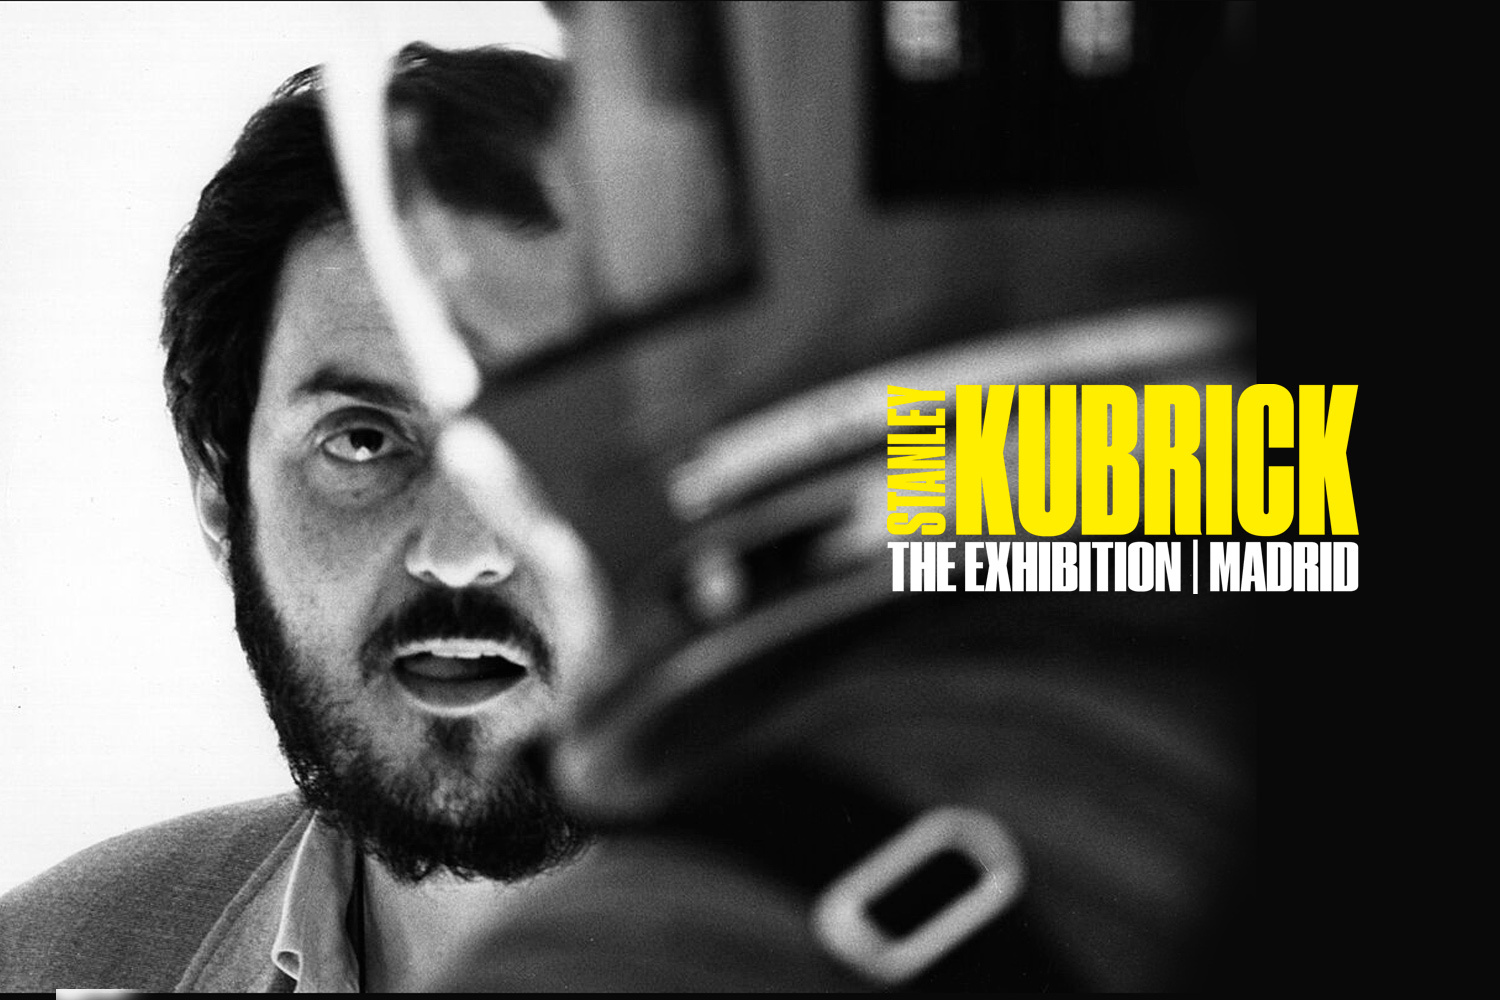 Stanley Kubrick, the exhibition's poster